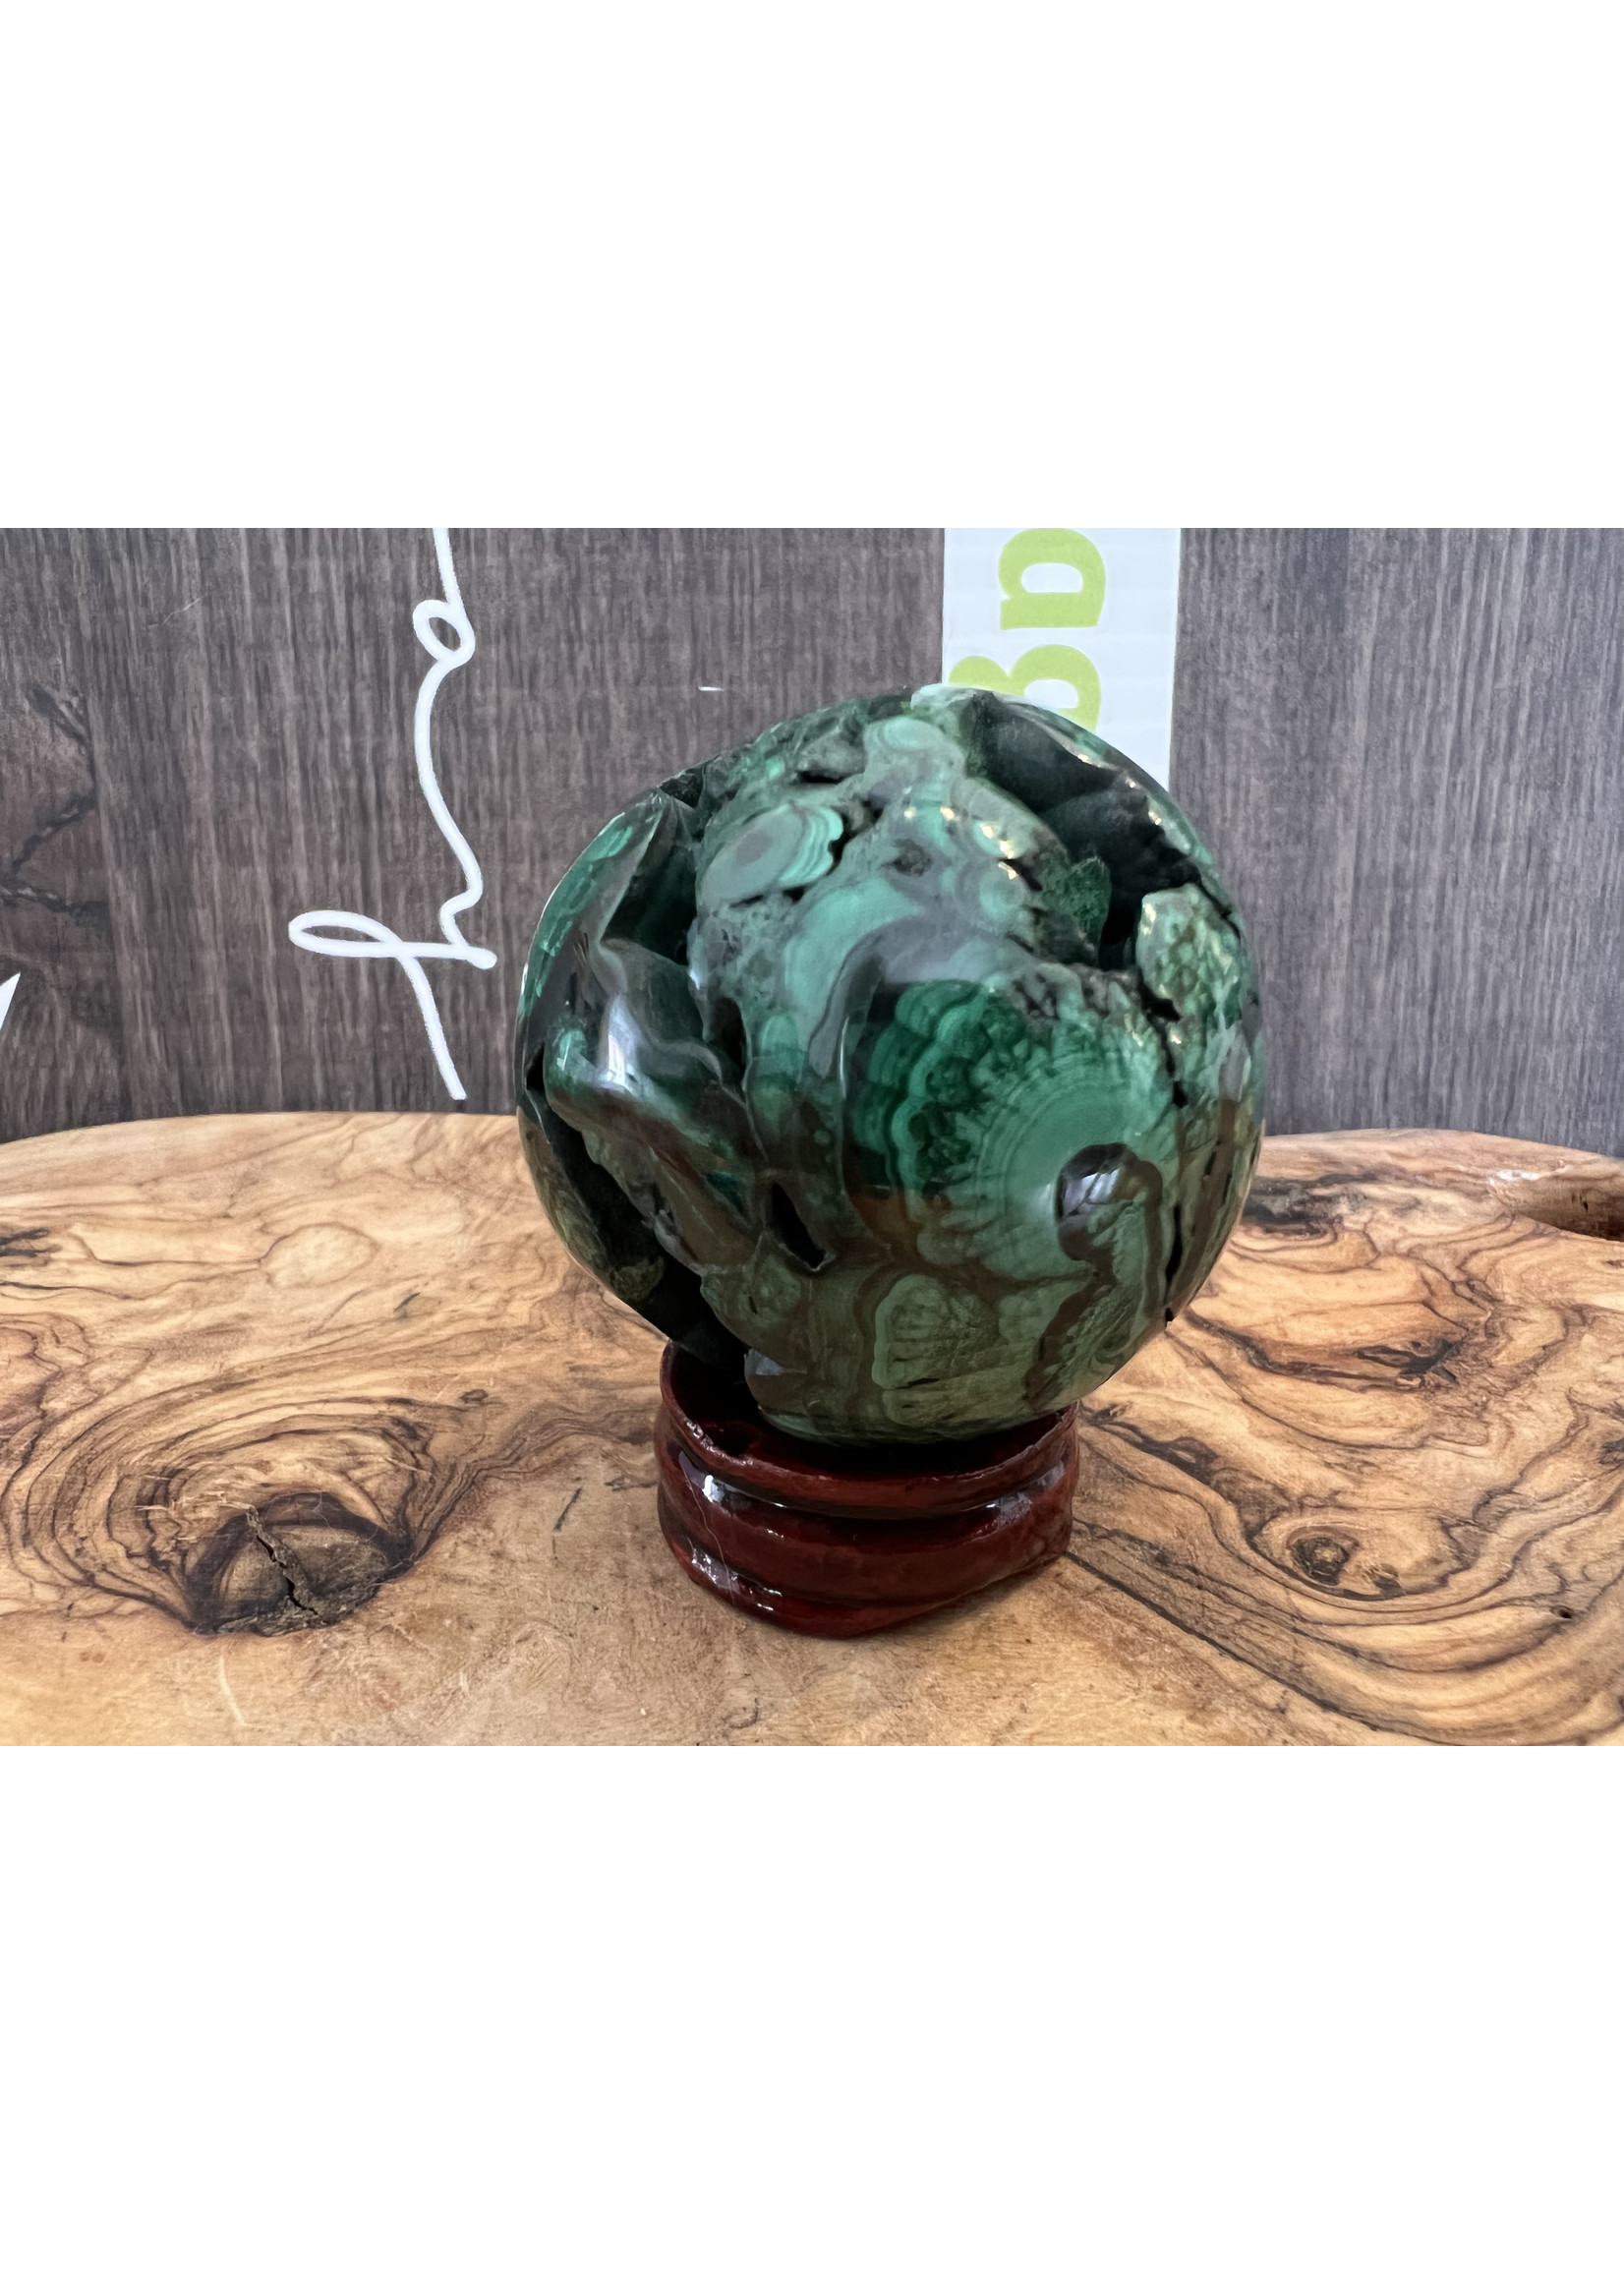 amazing malachite sphere with clusters , stone linked to the heart chakra, harmonizes our emotions improves our relationships